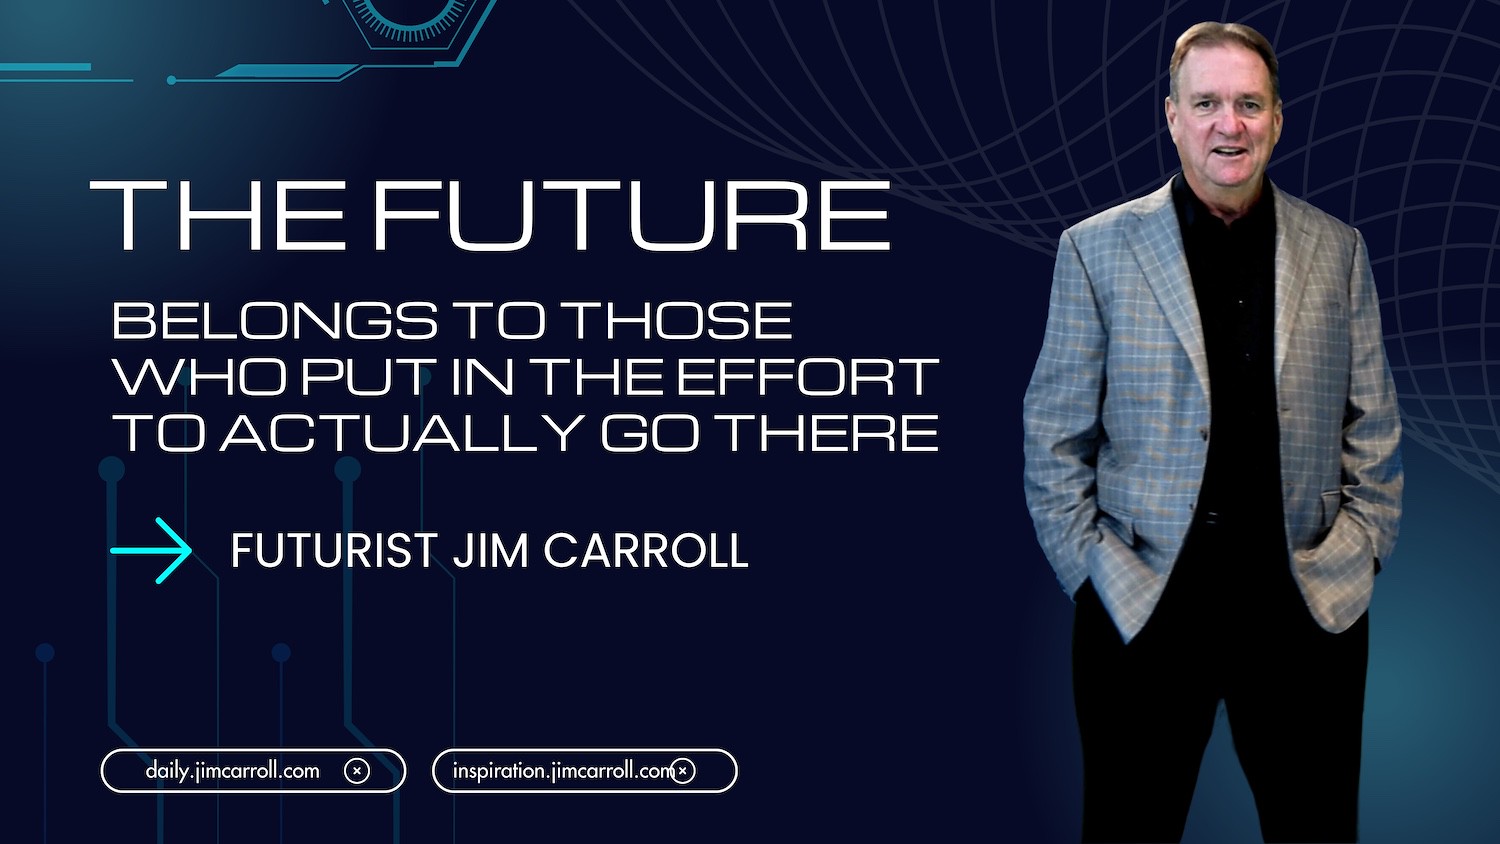 "The future belongs to those who put in the effort to actually go there!" - Futurist Jim Carroll